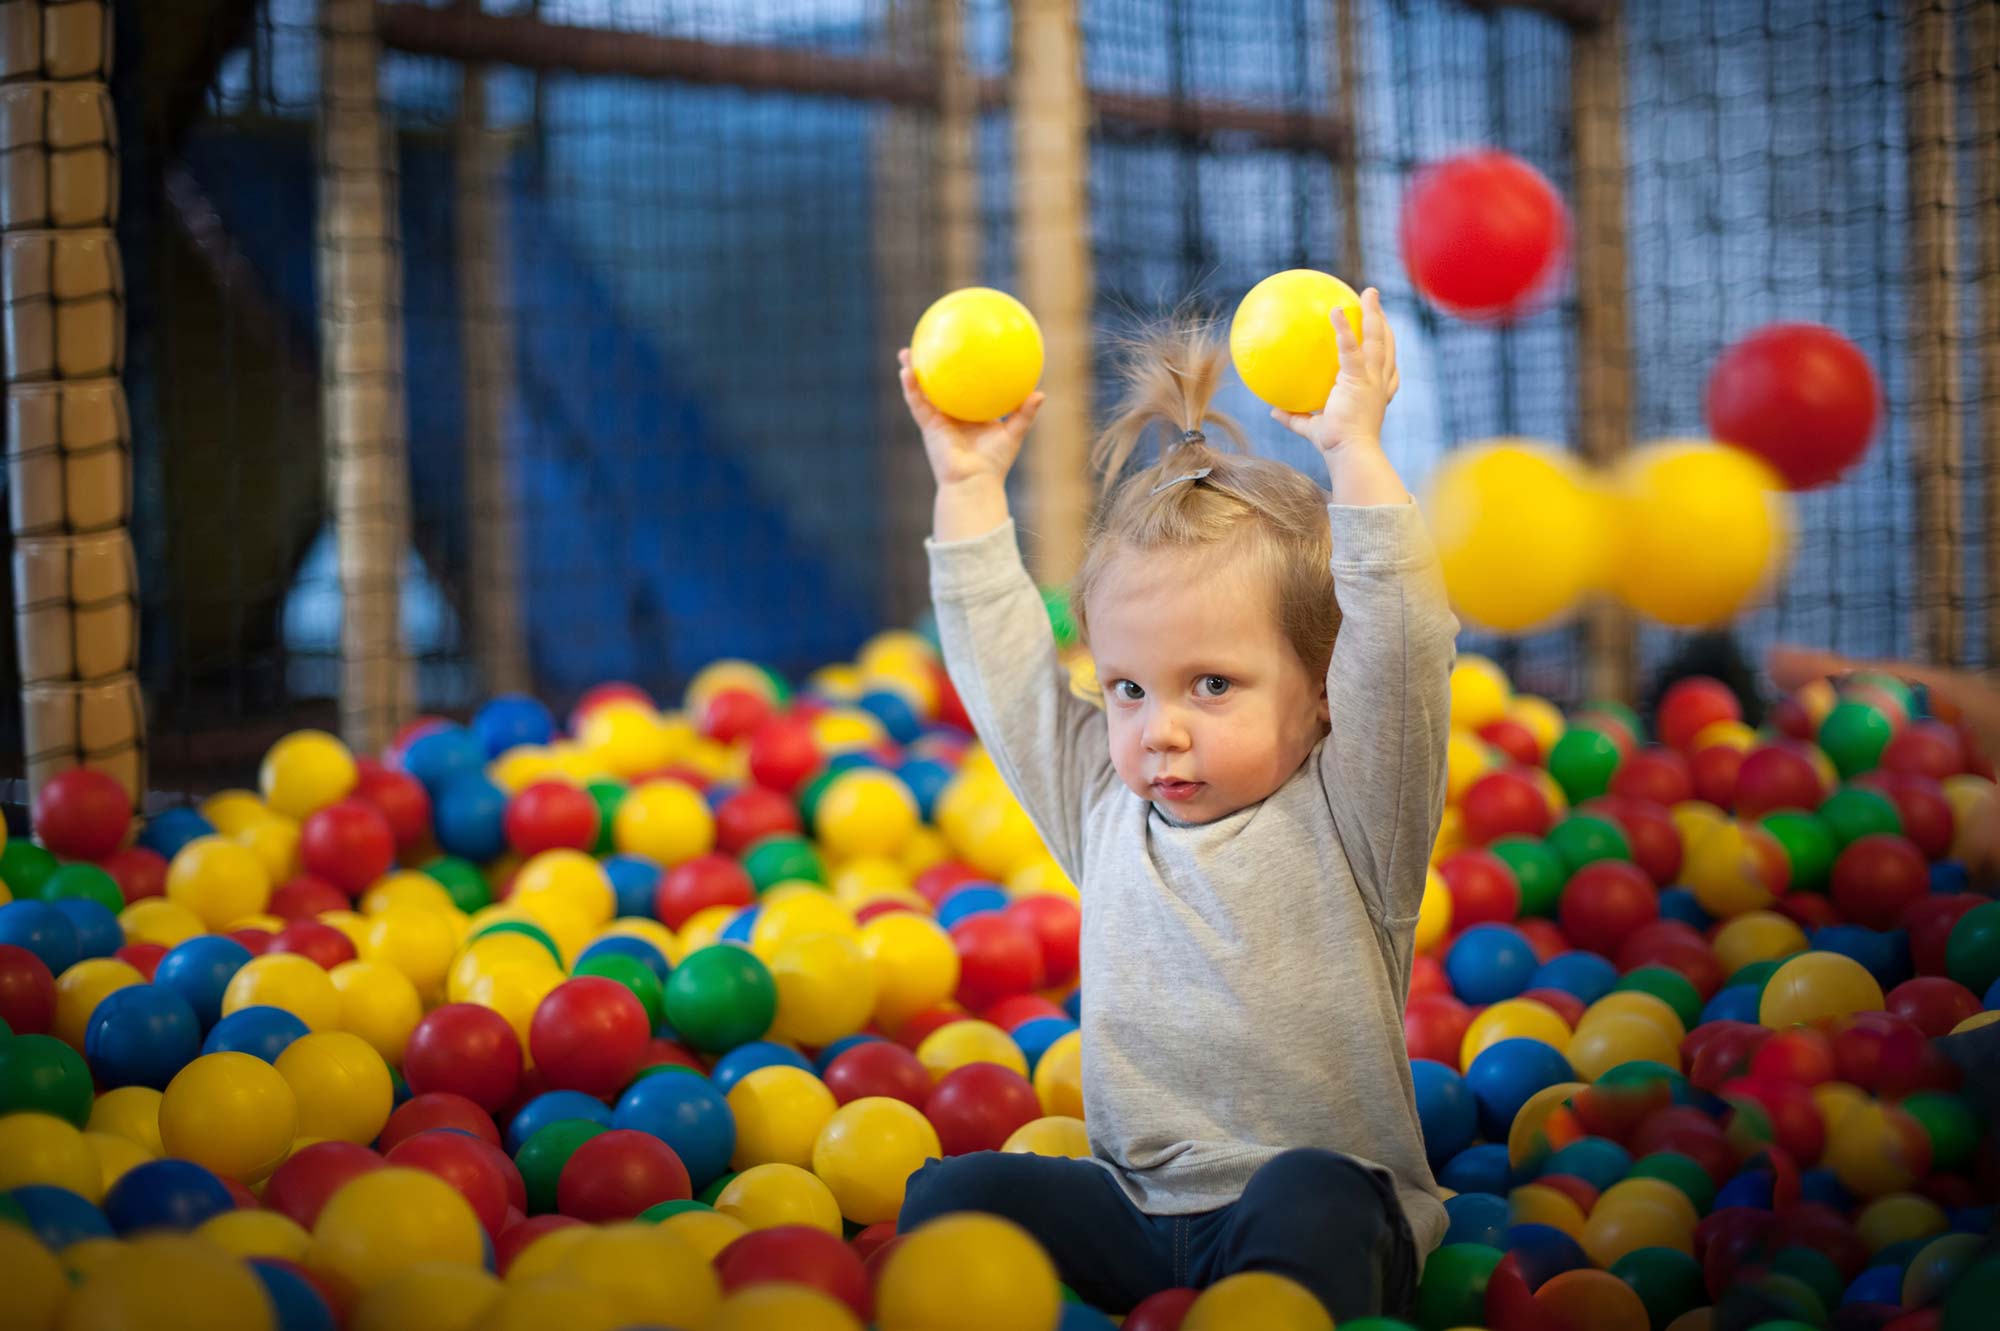 A young girl in a ball pool